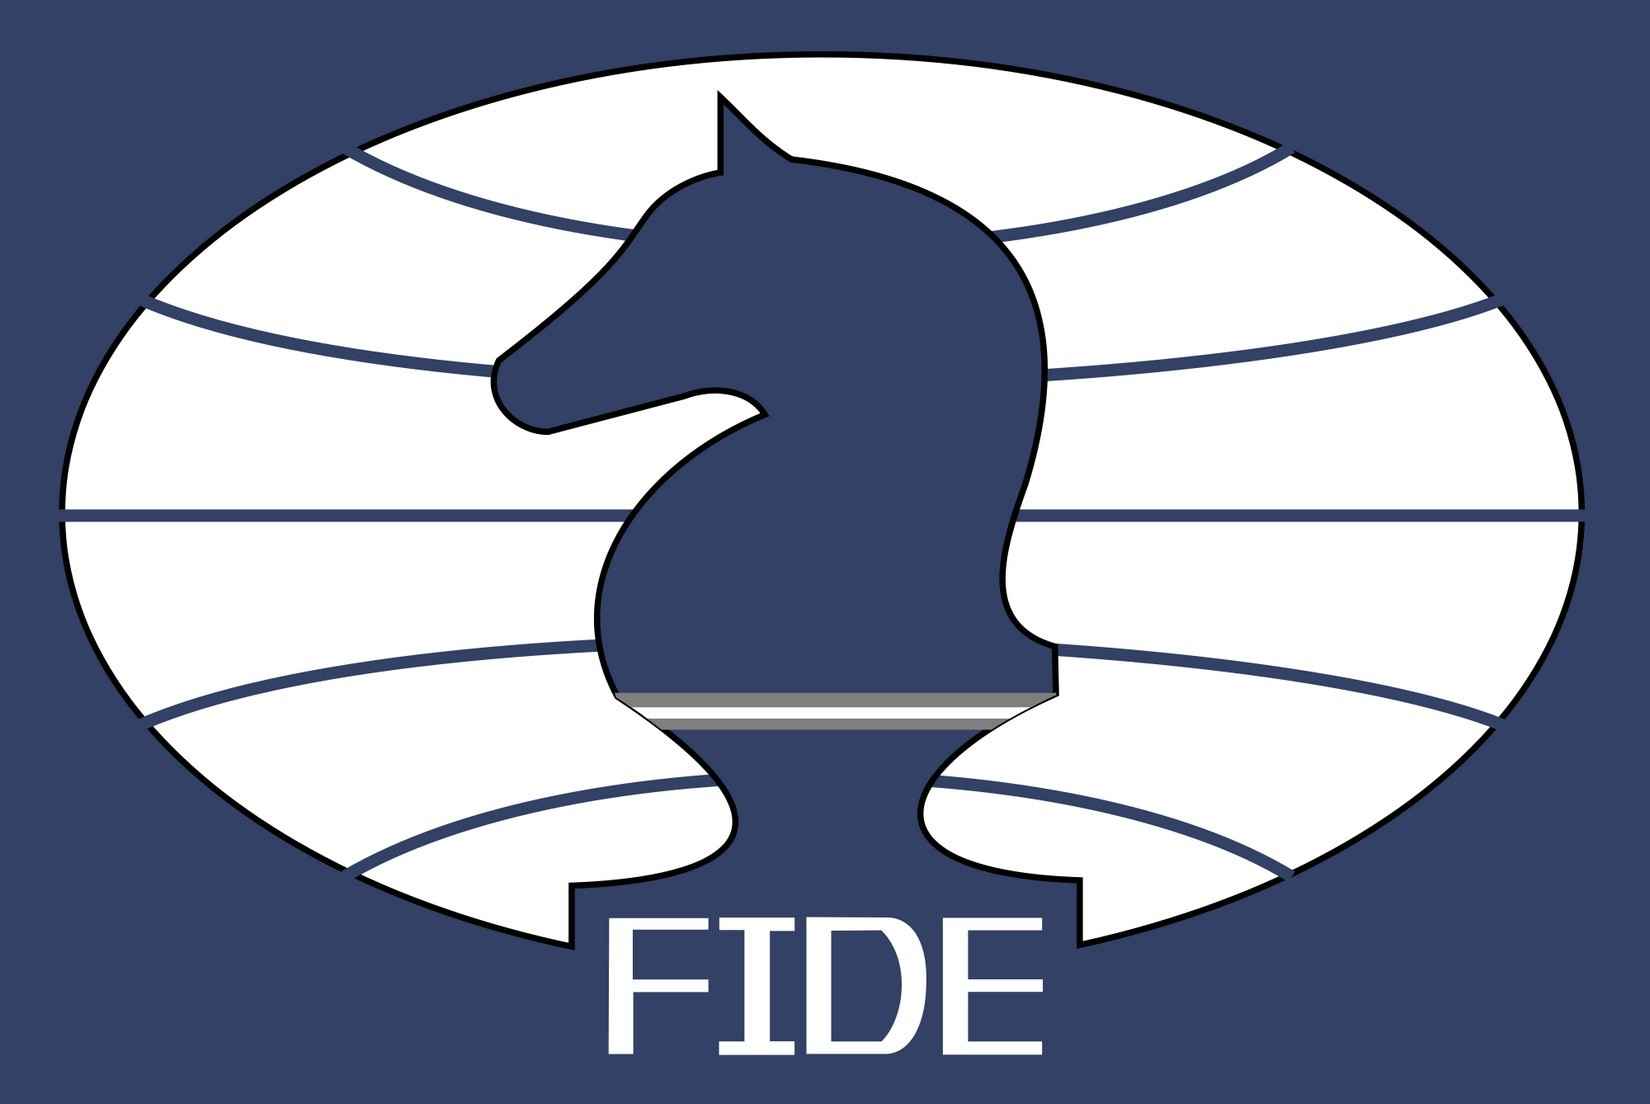 FIDE Logo - World Chess Federation Download Vector